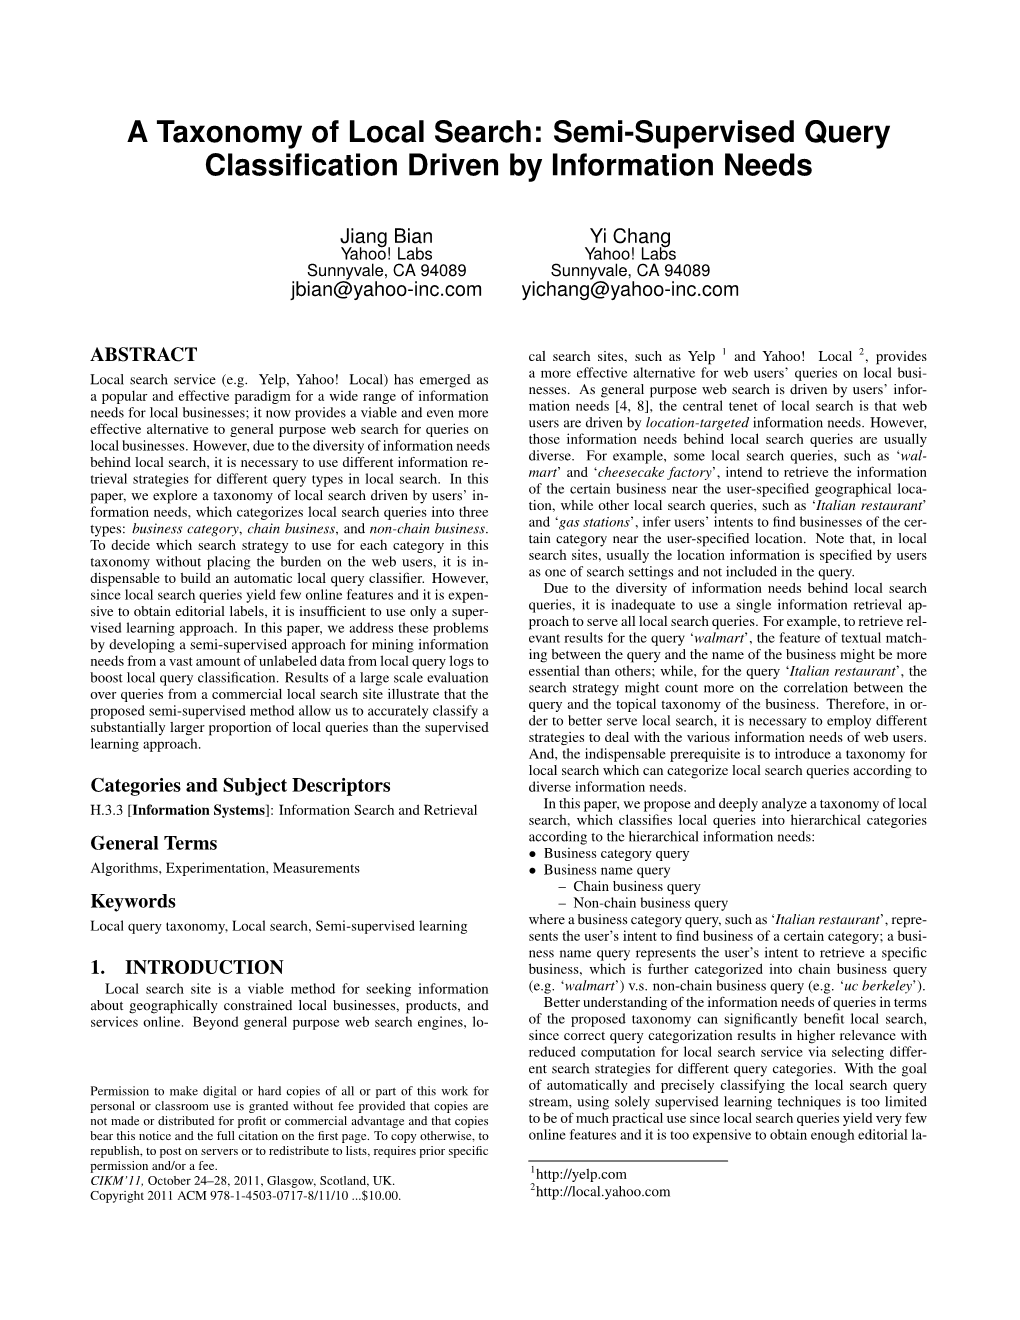 A Taxonomy of Local Search: Semi-Supervised Query Classification Driven by Information Needs